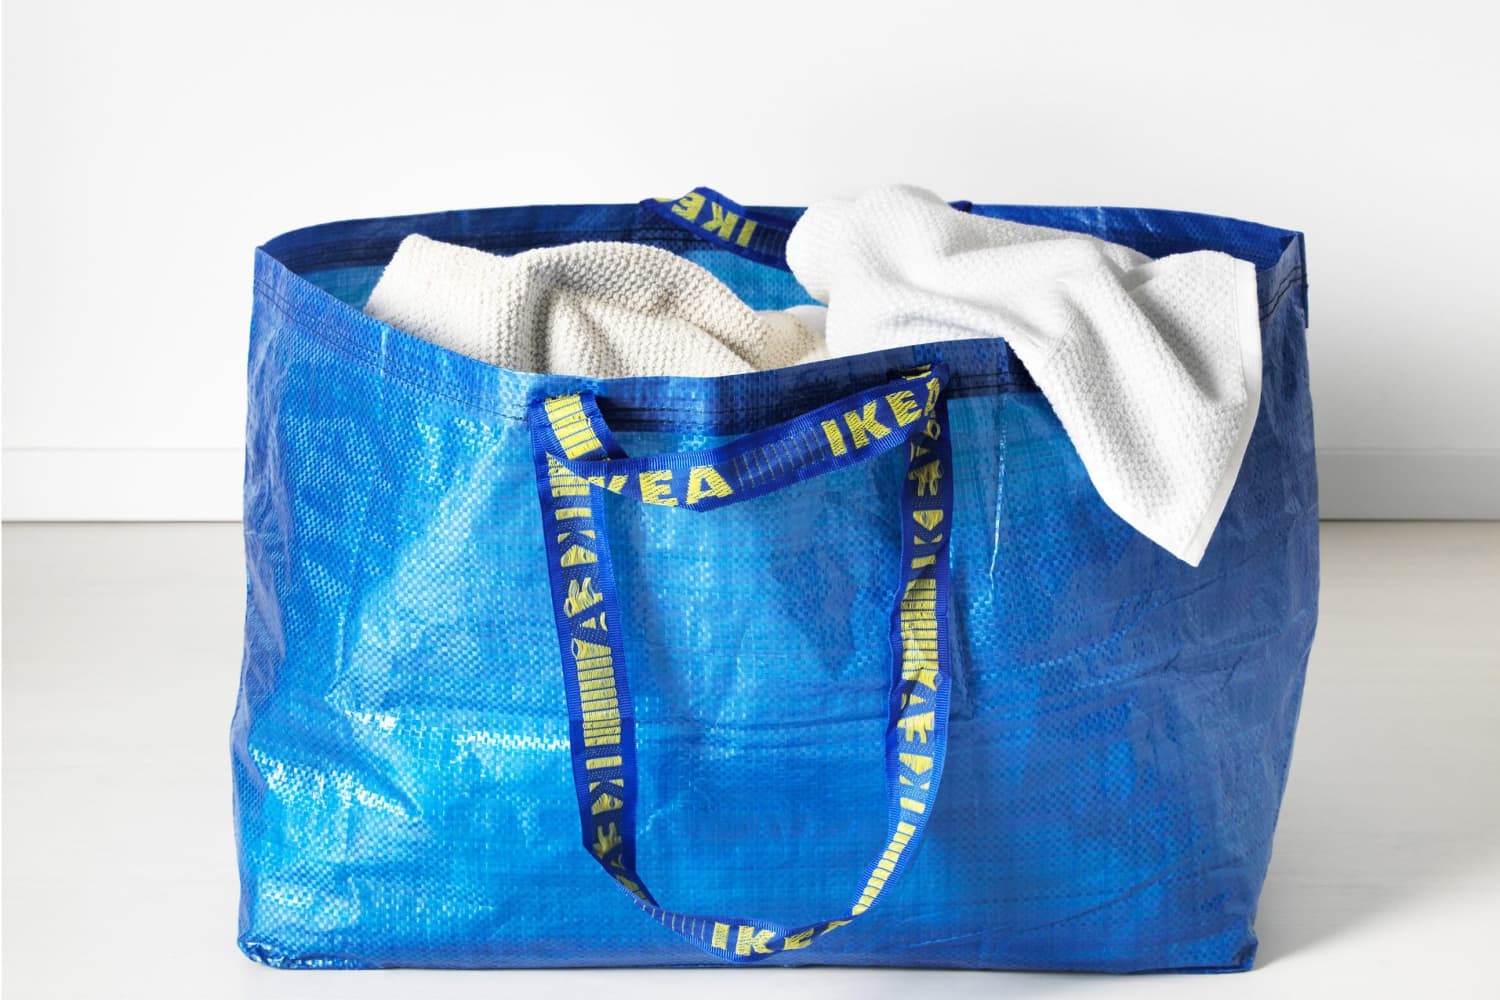 IKEA Frakta bag: How to use as workout tool - Sports Illustrated